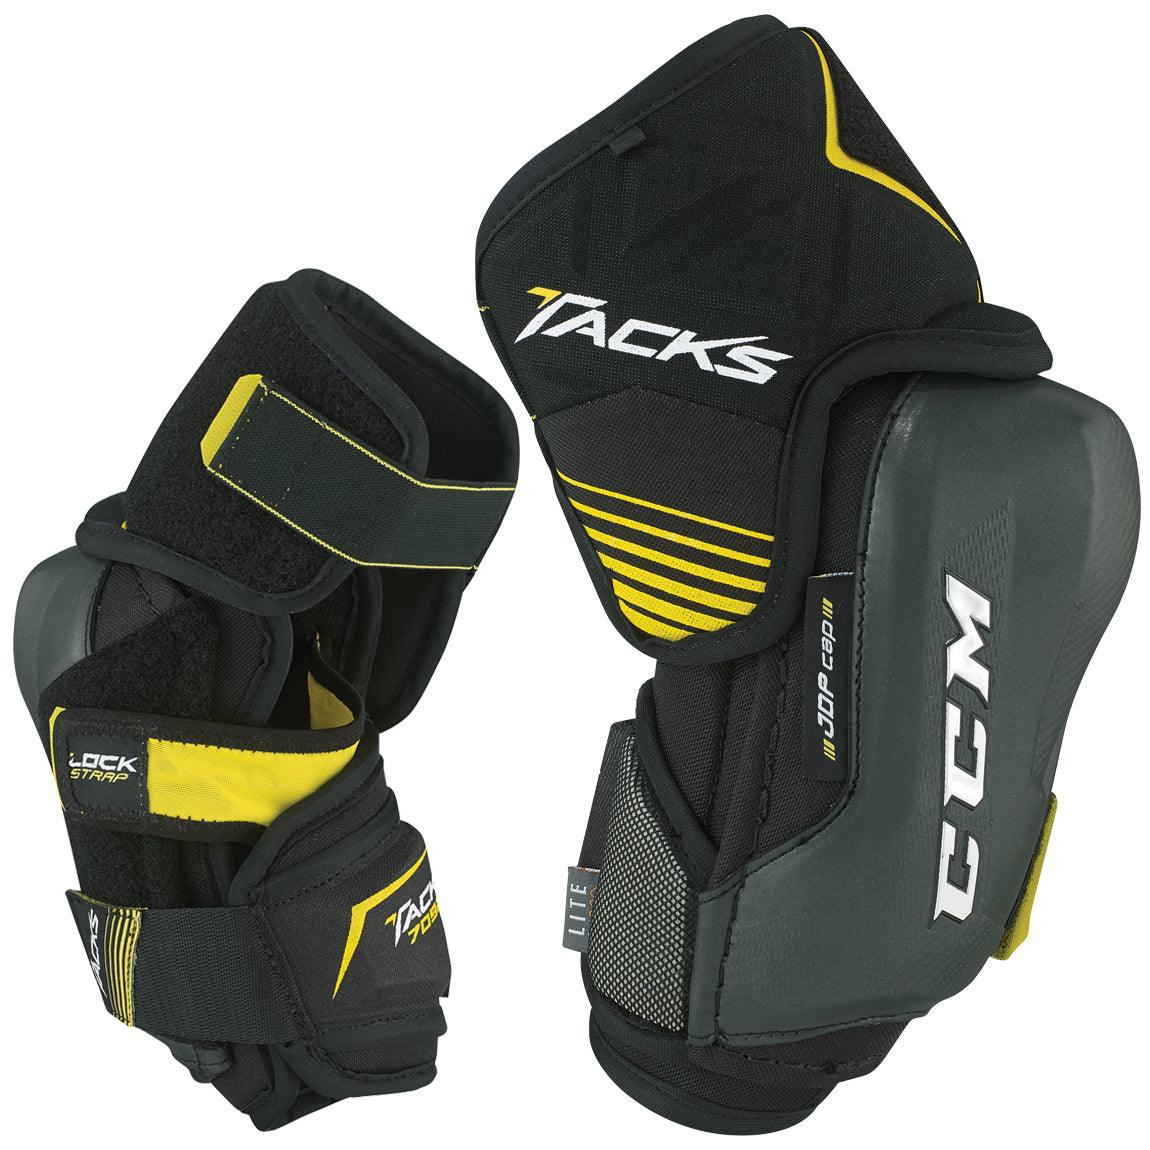 Tacks 7092 Elbow Pads - Senior - Sports Excellence